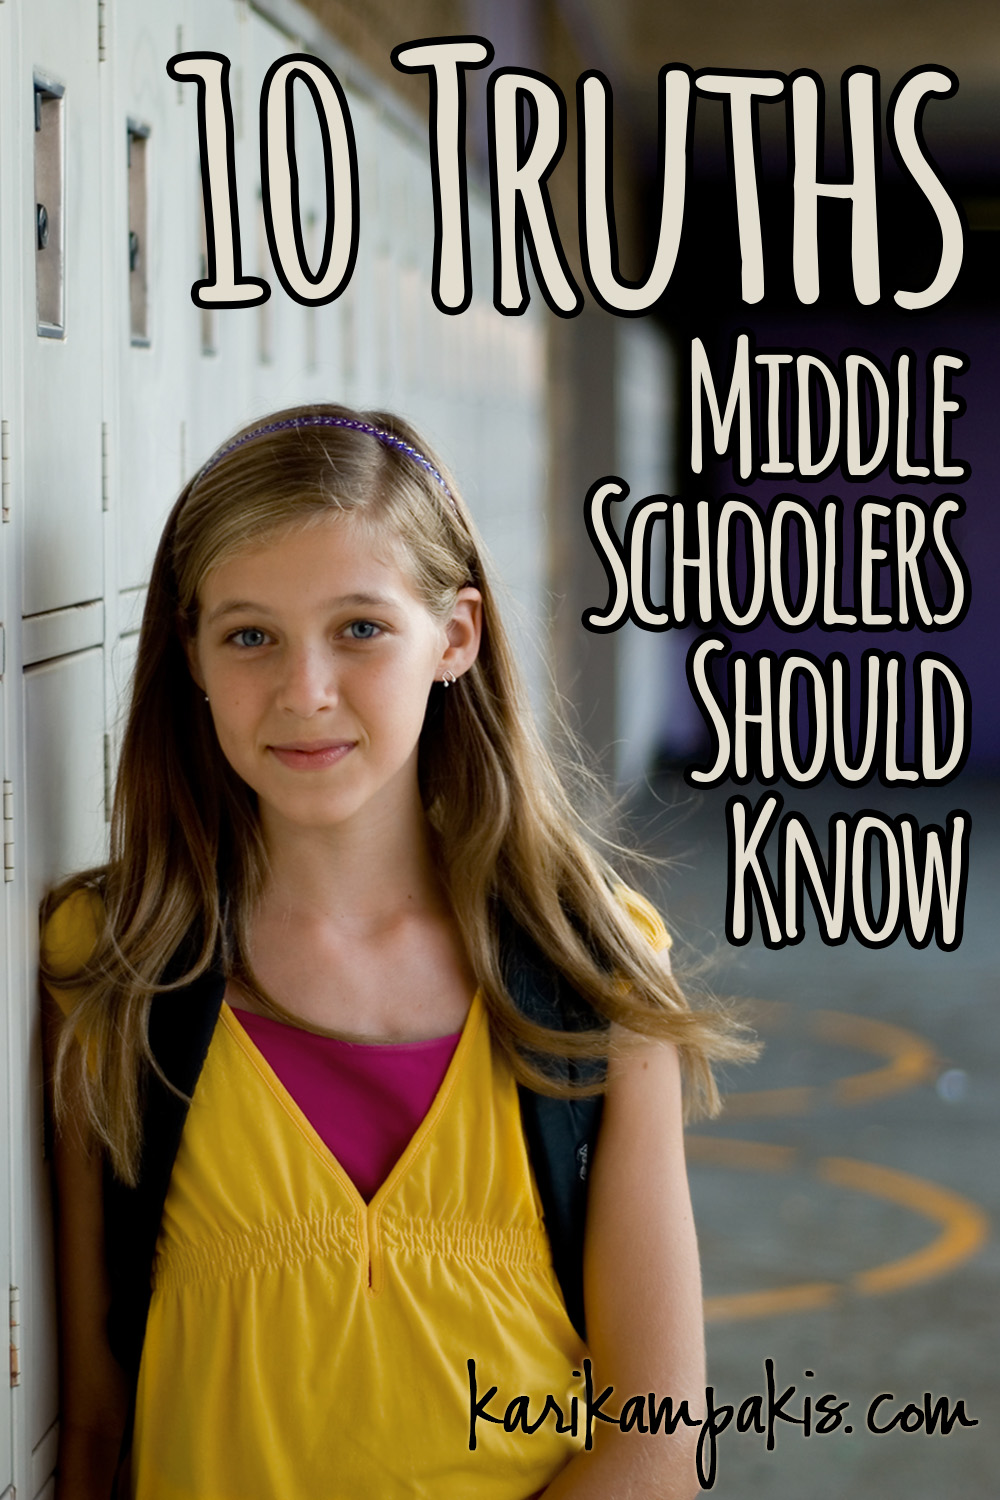 10 Truths Middle Schoolers Should Know